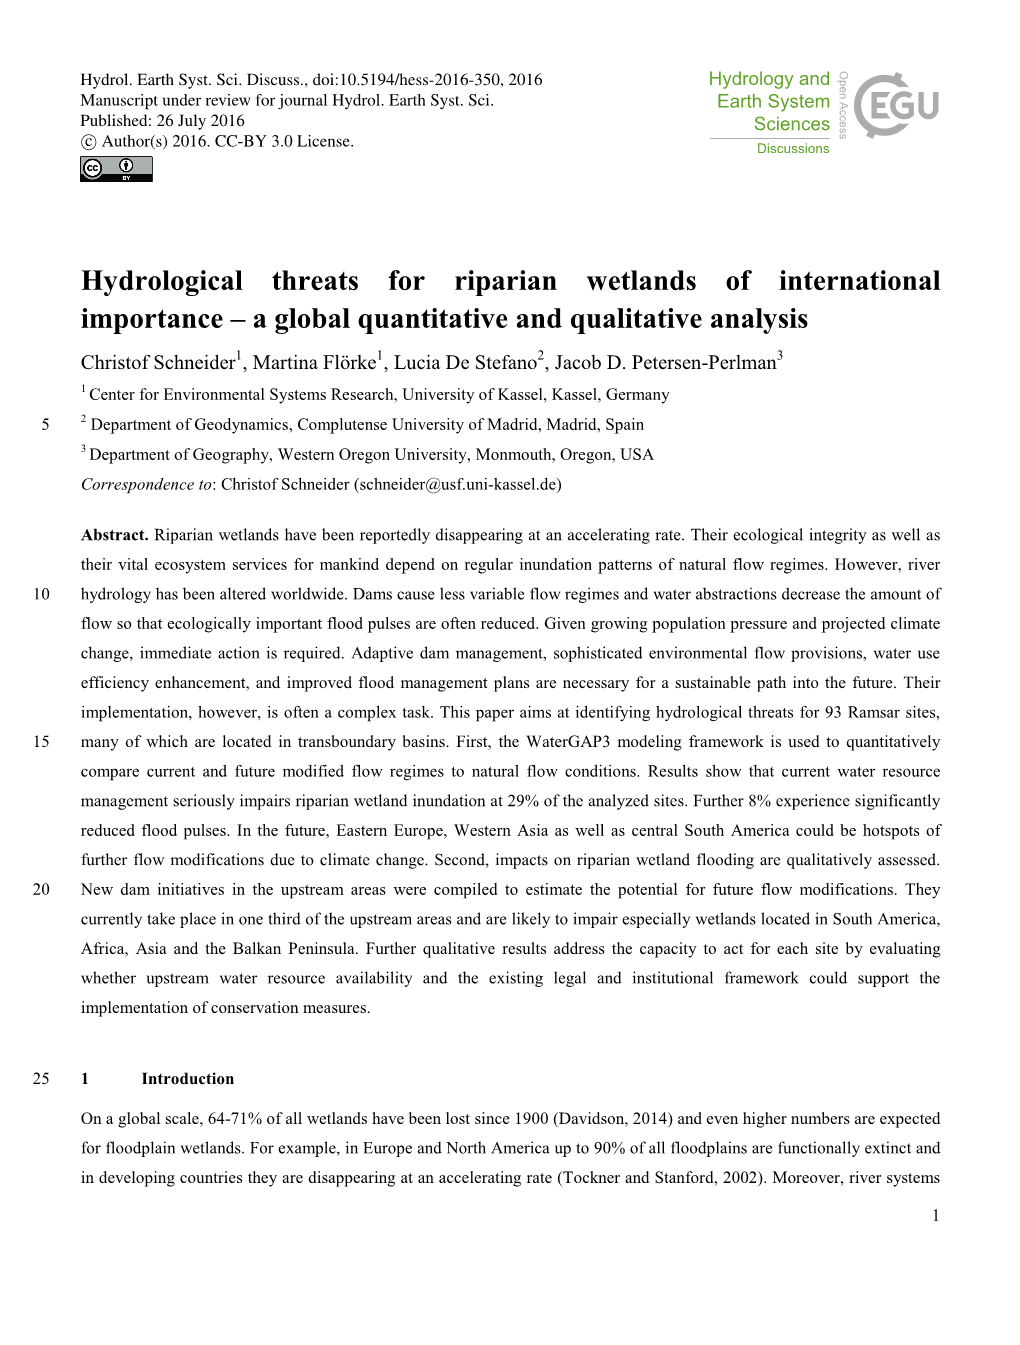 Hydrological Threats for Riparian Wetlands of International Importance